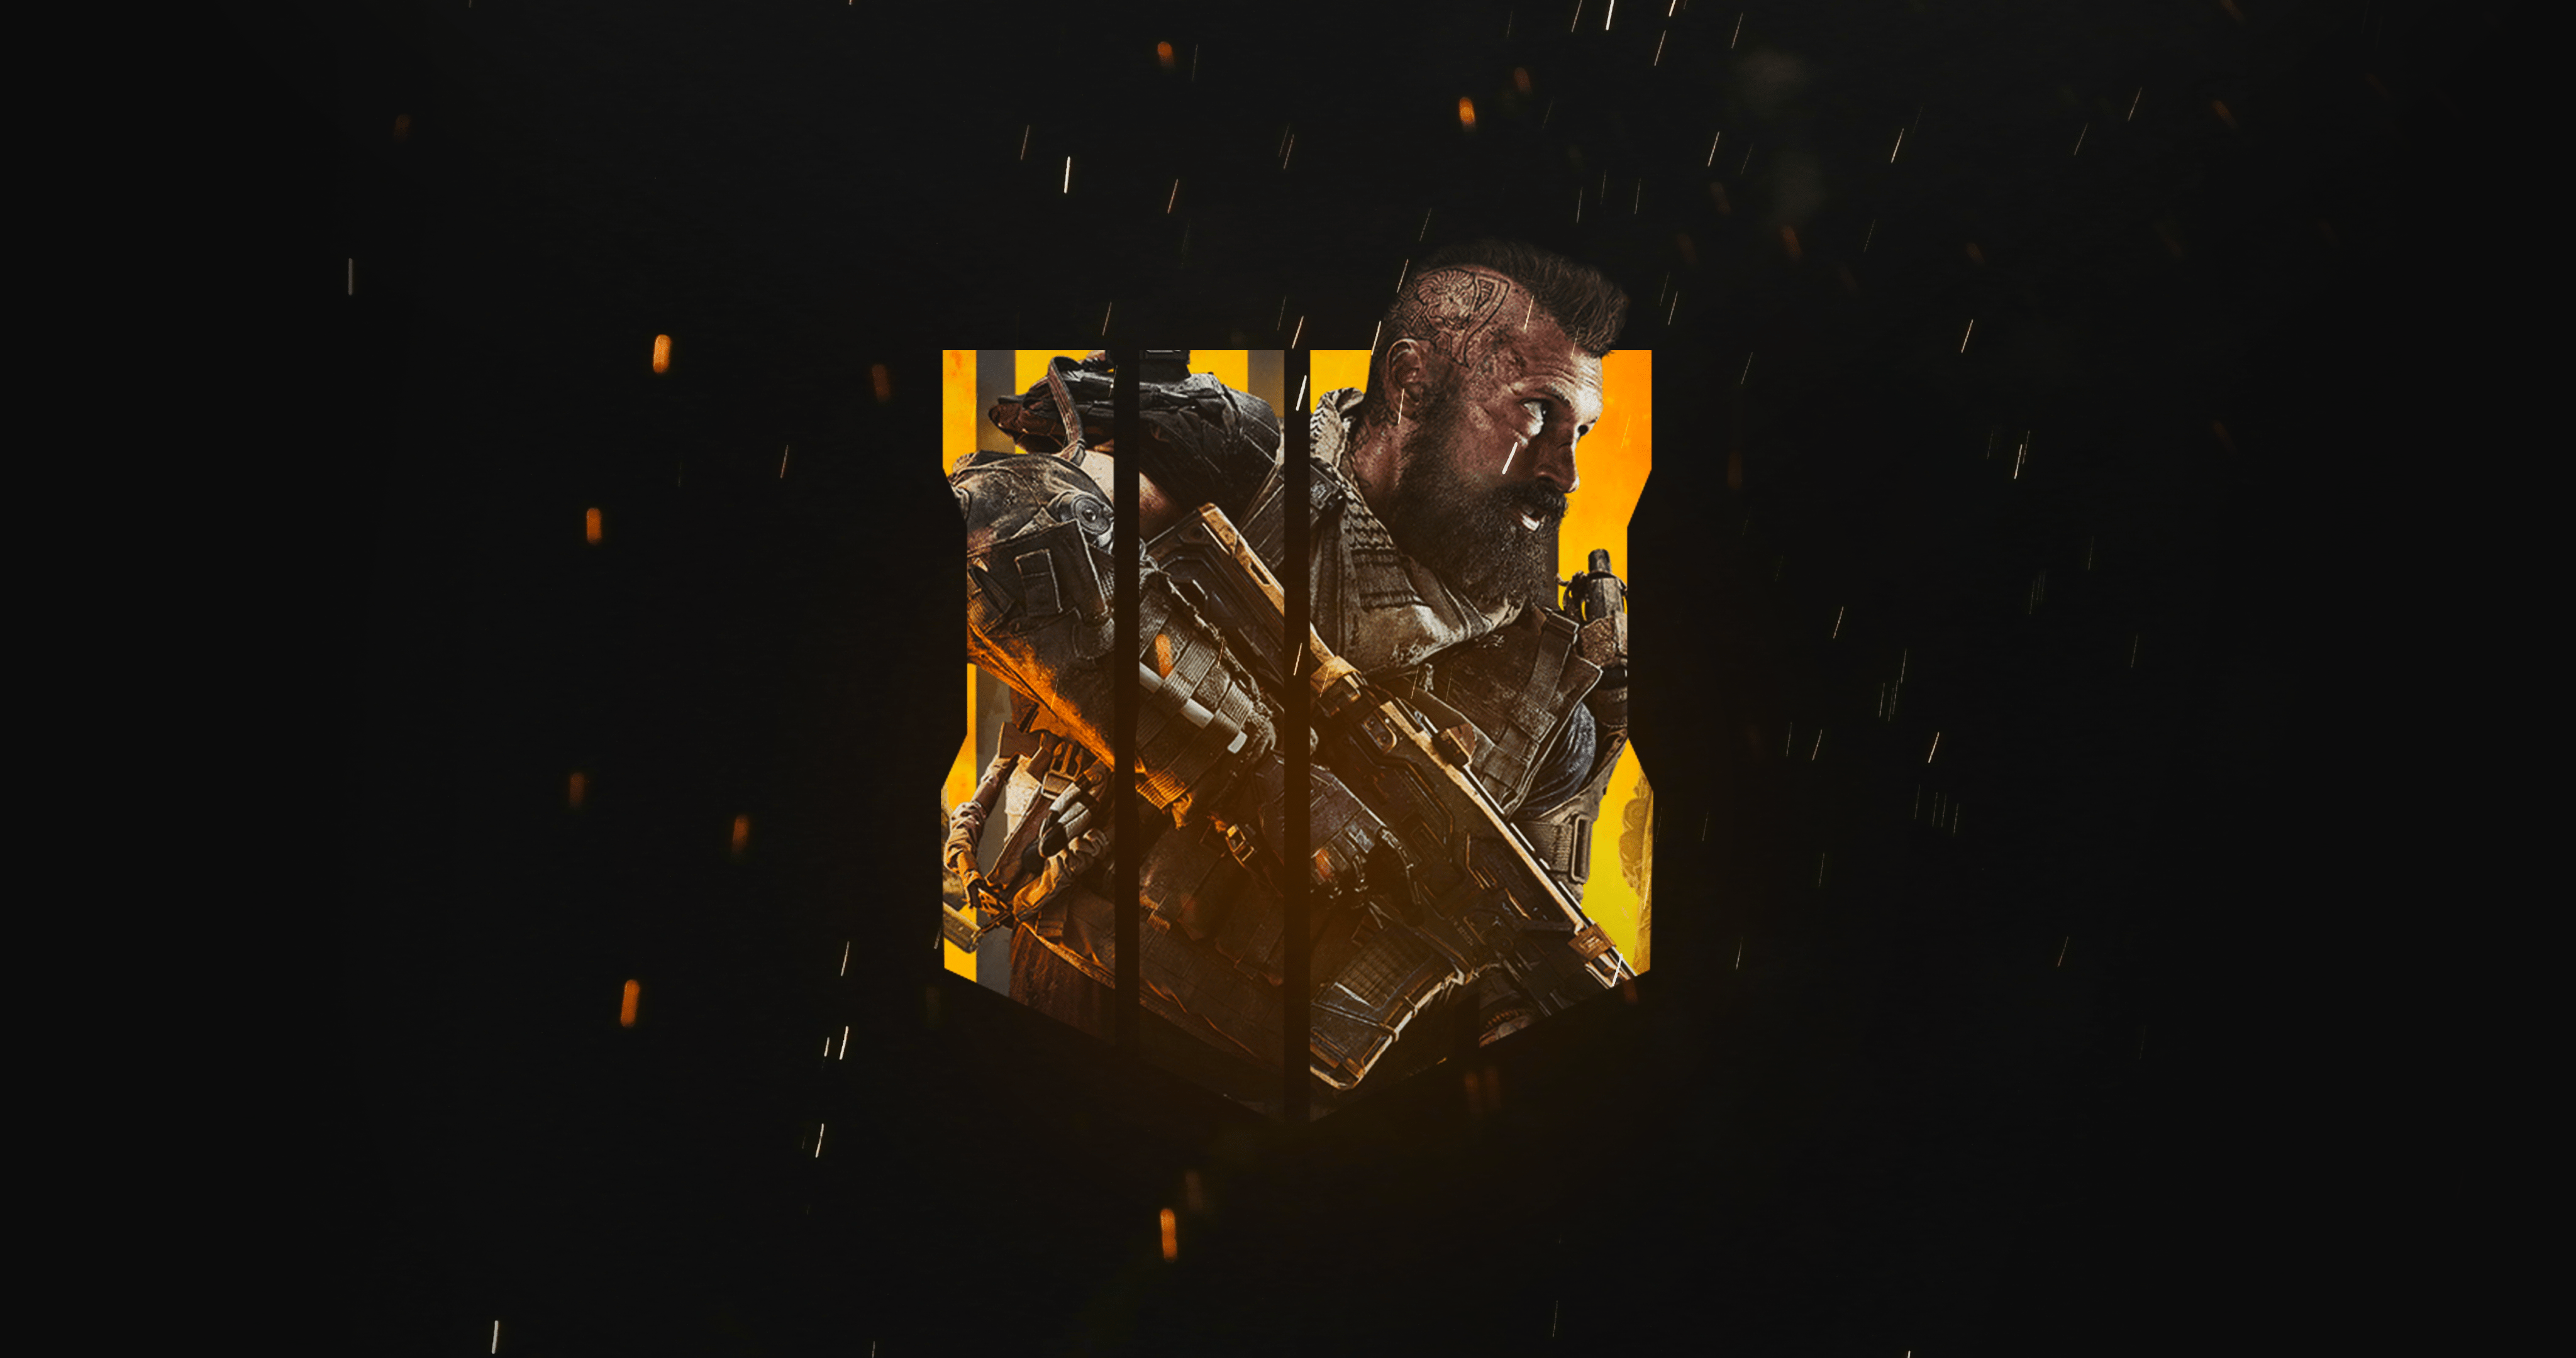 1440p call of duty black ops 4 backgrounds